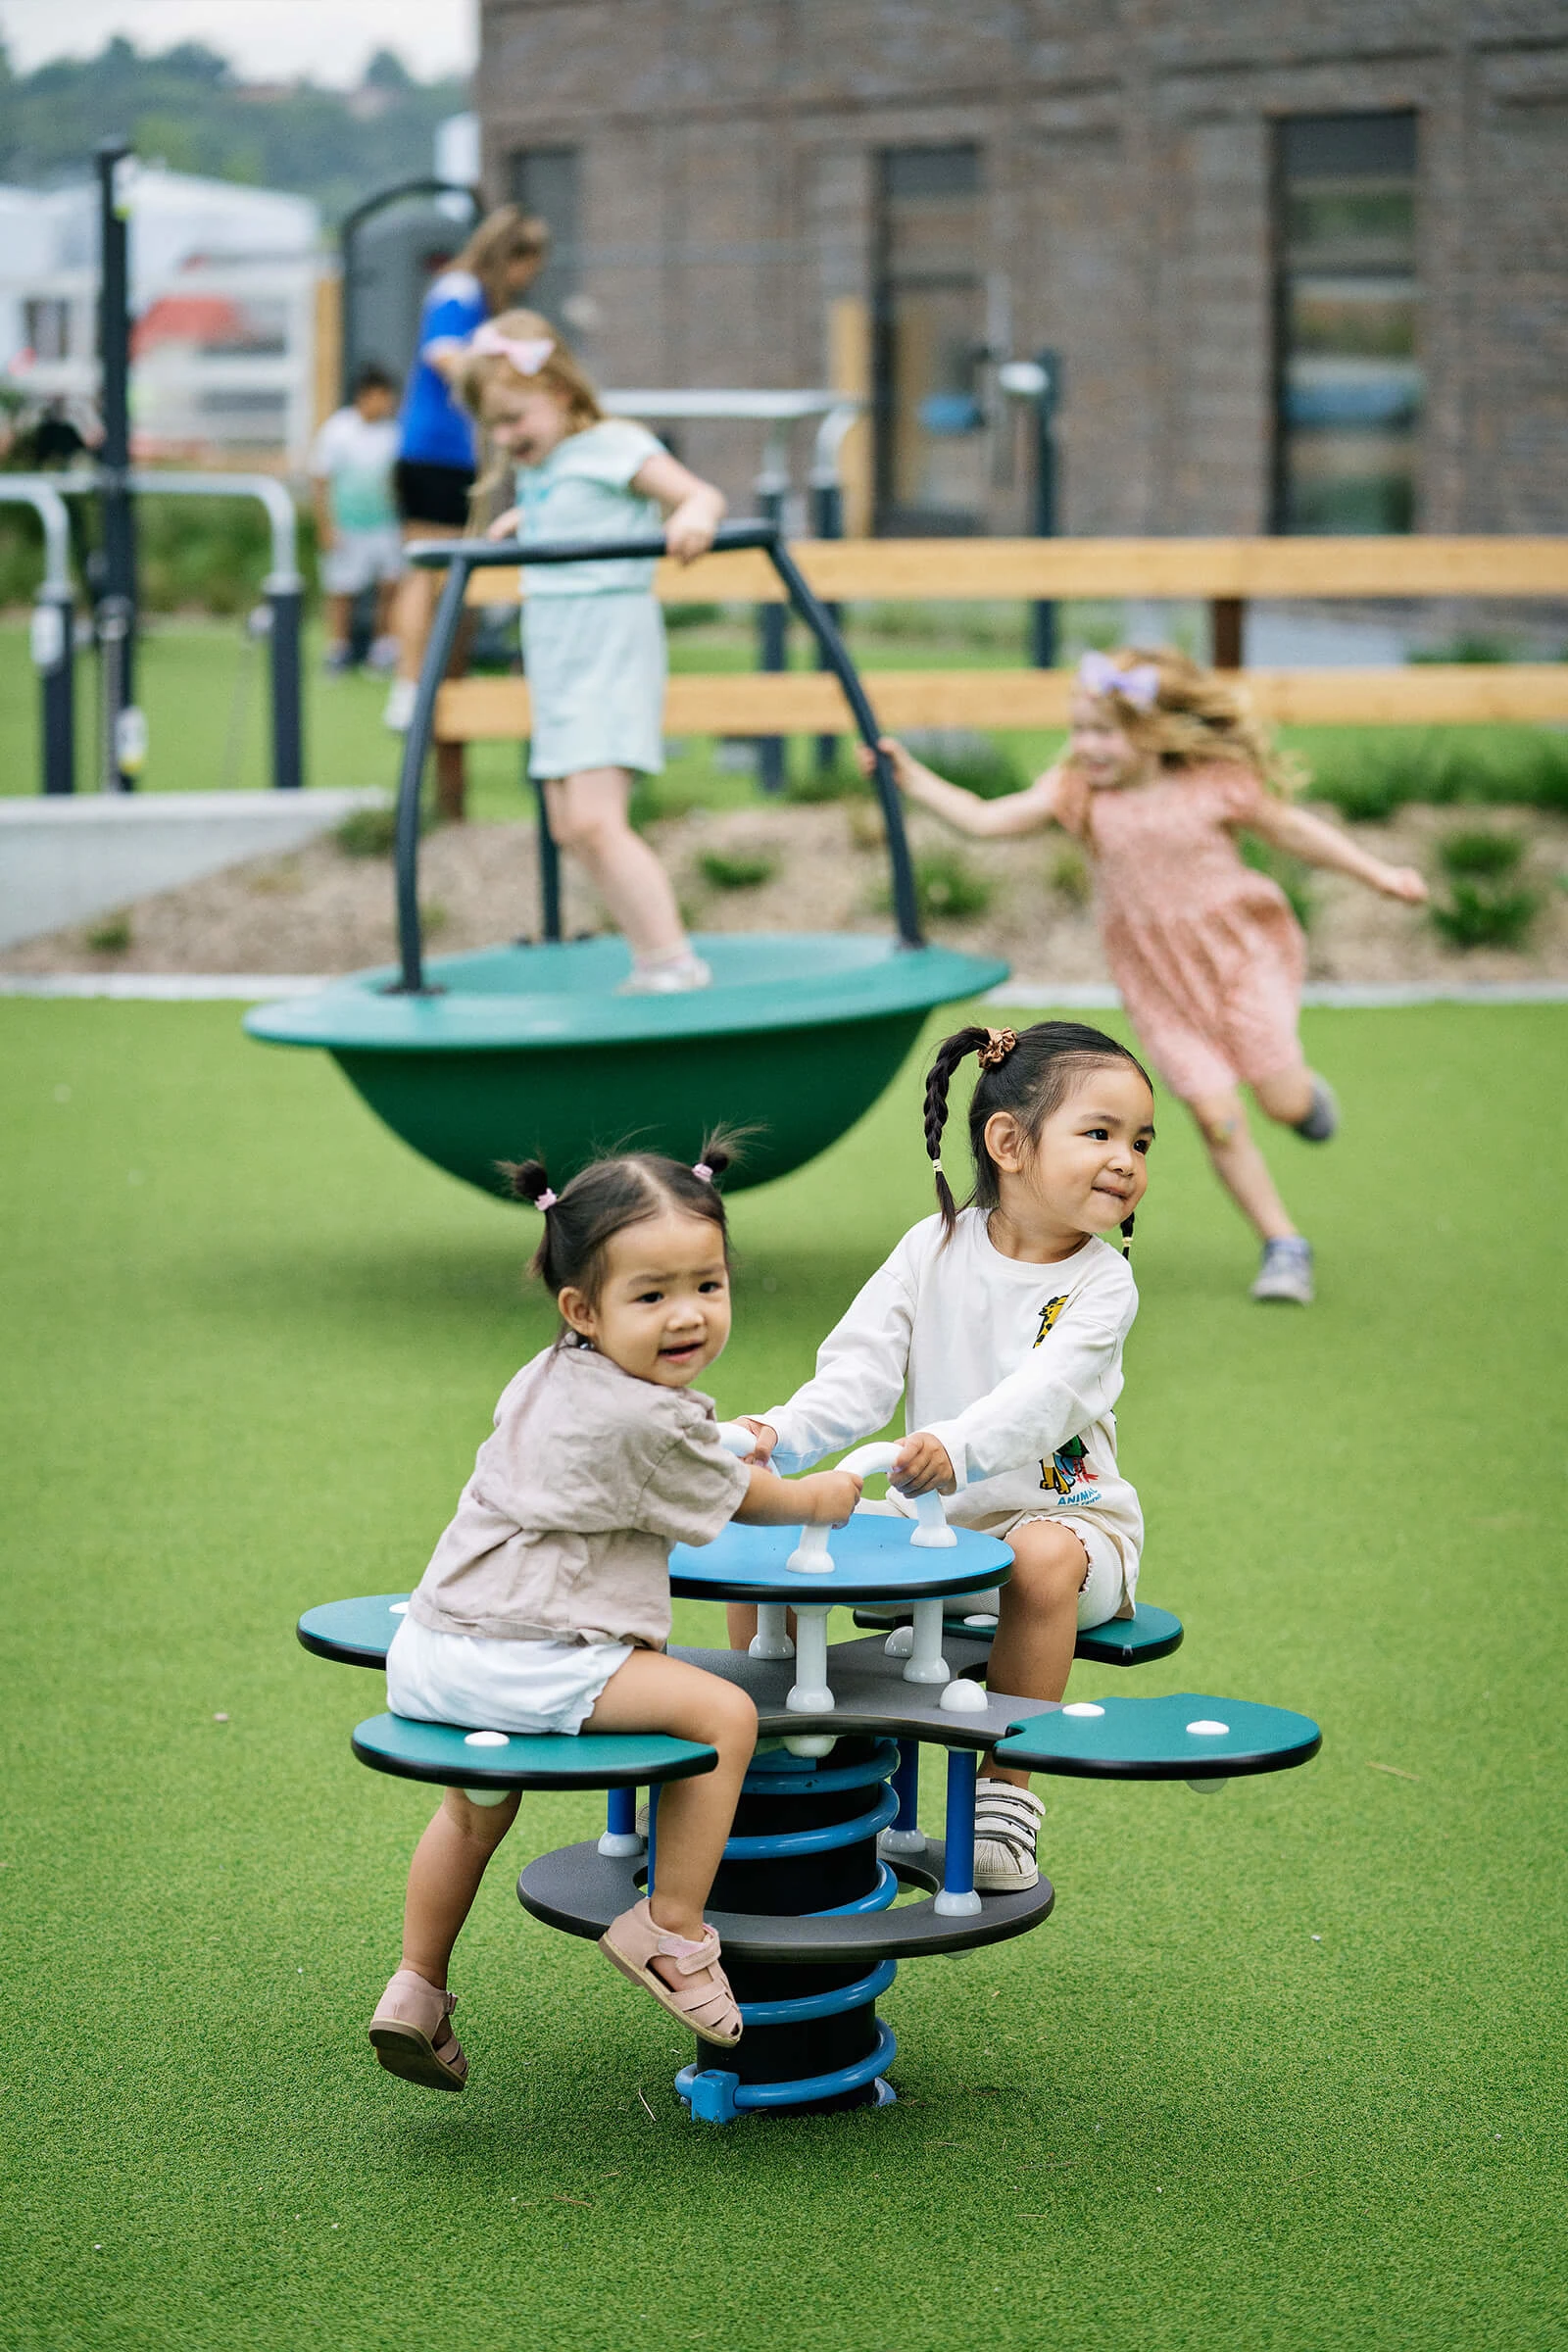 Toddlers playing on daisy springer playground equipment